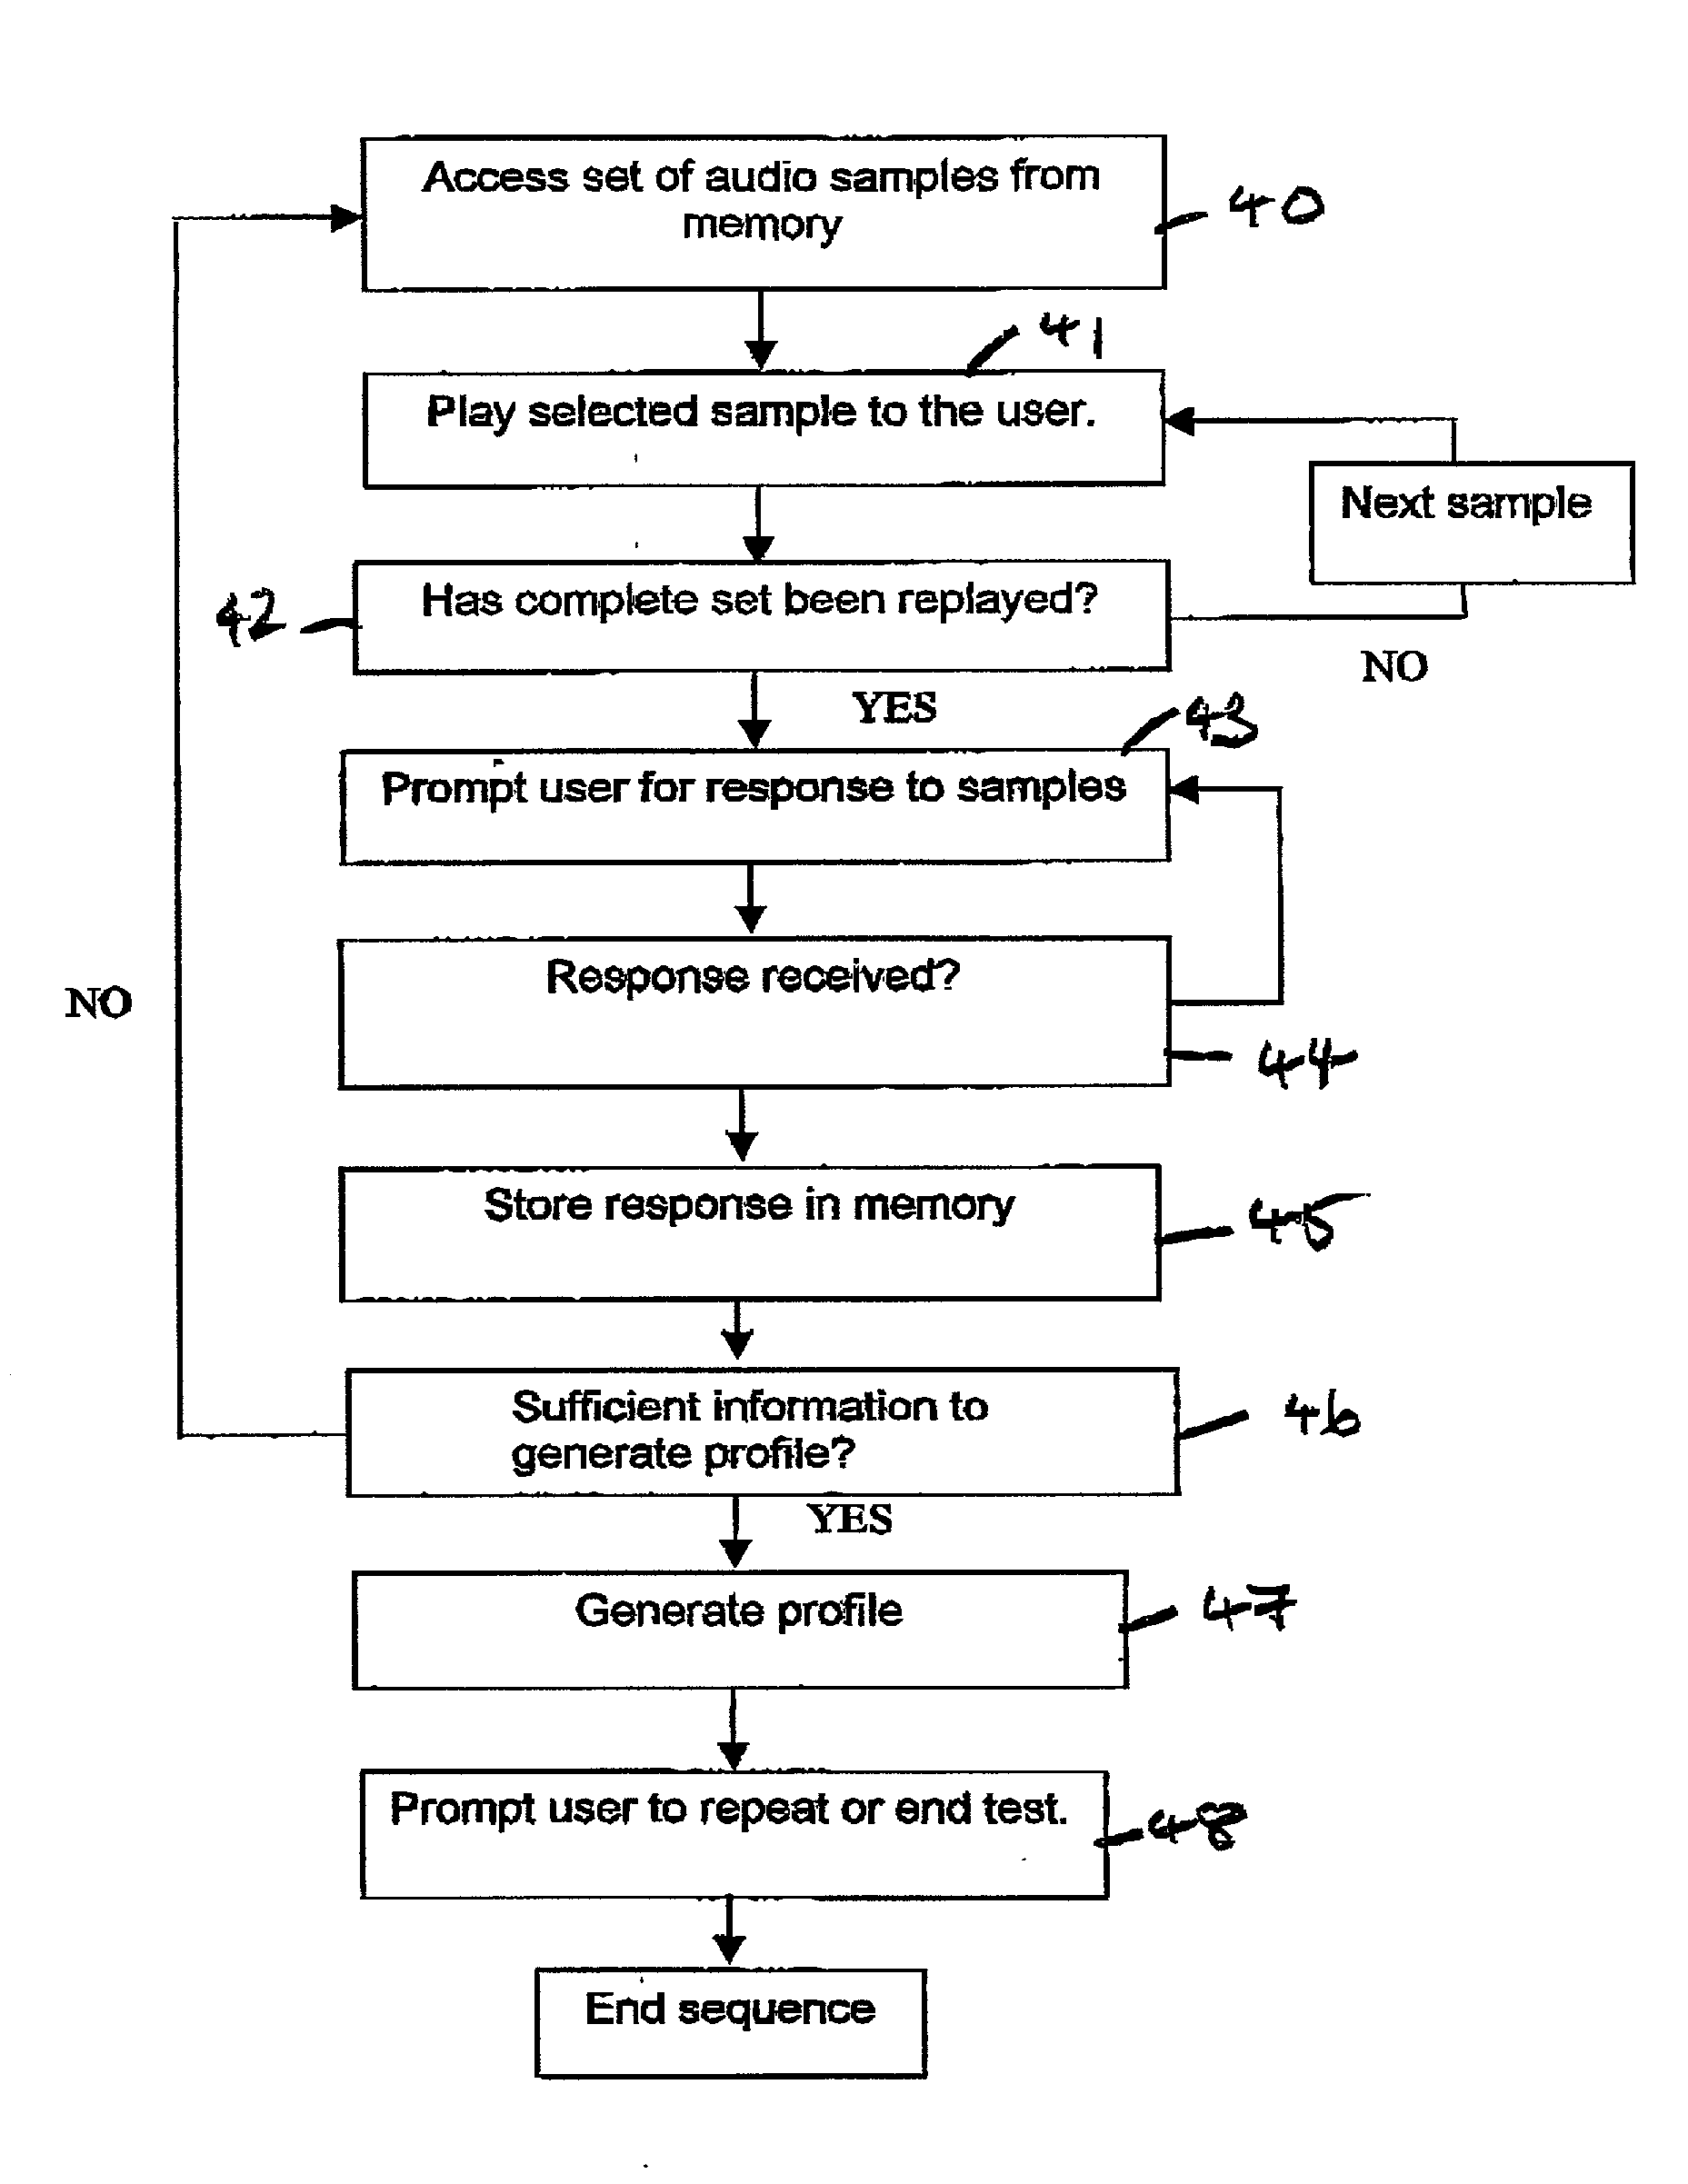 Audio reproduction and personal audio profile gathering apparatus and method